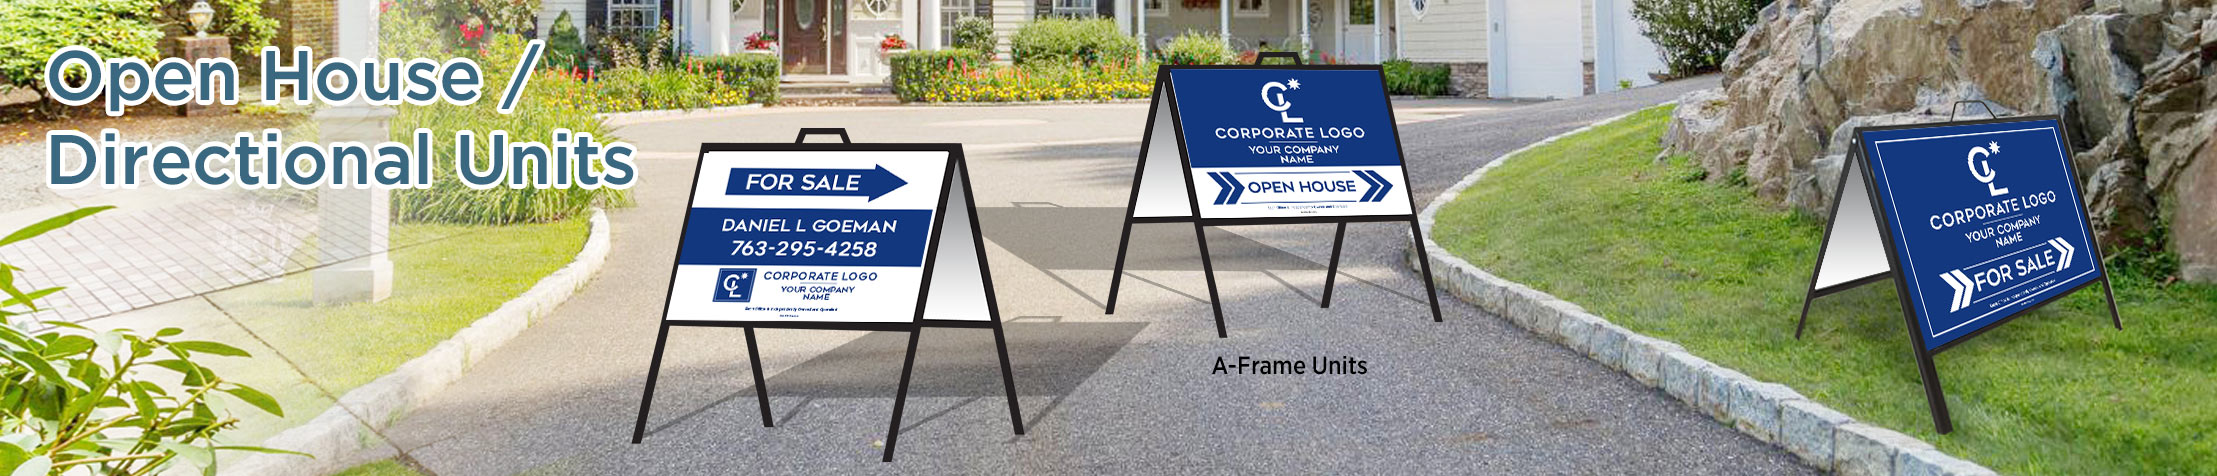 Coldwell Banker Real Estate Arrow Shaped Signs - Coldwell Banker directional real estate signs | BestPrintBuy.com